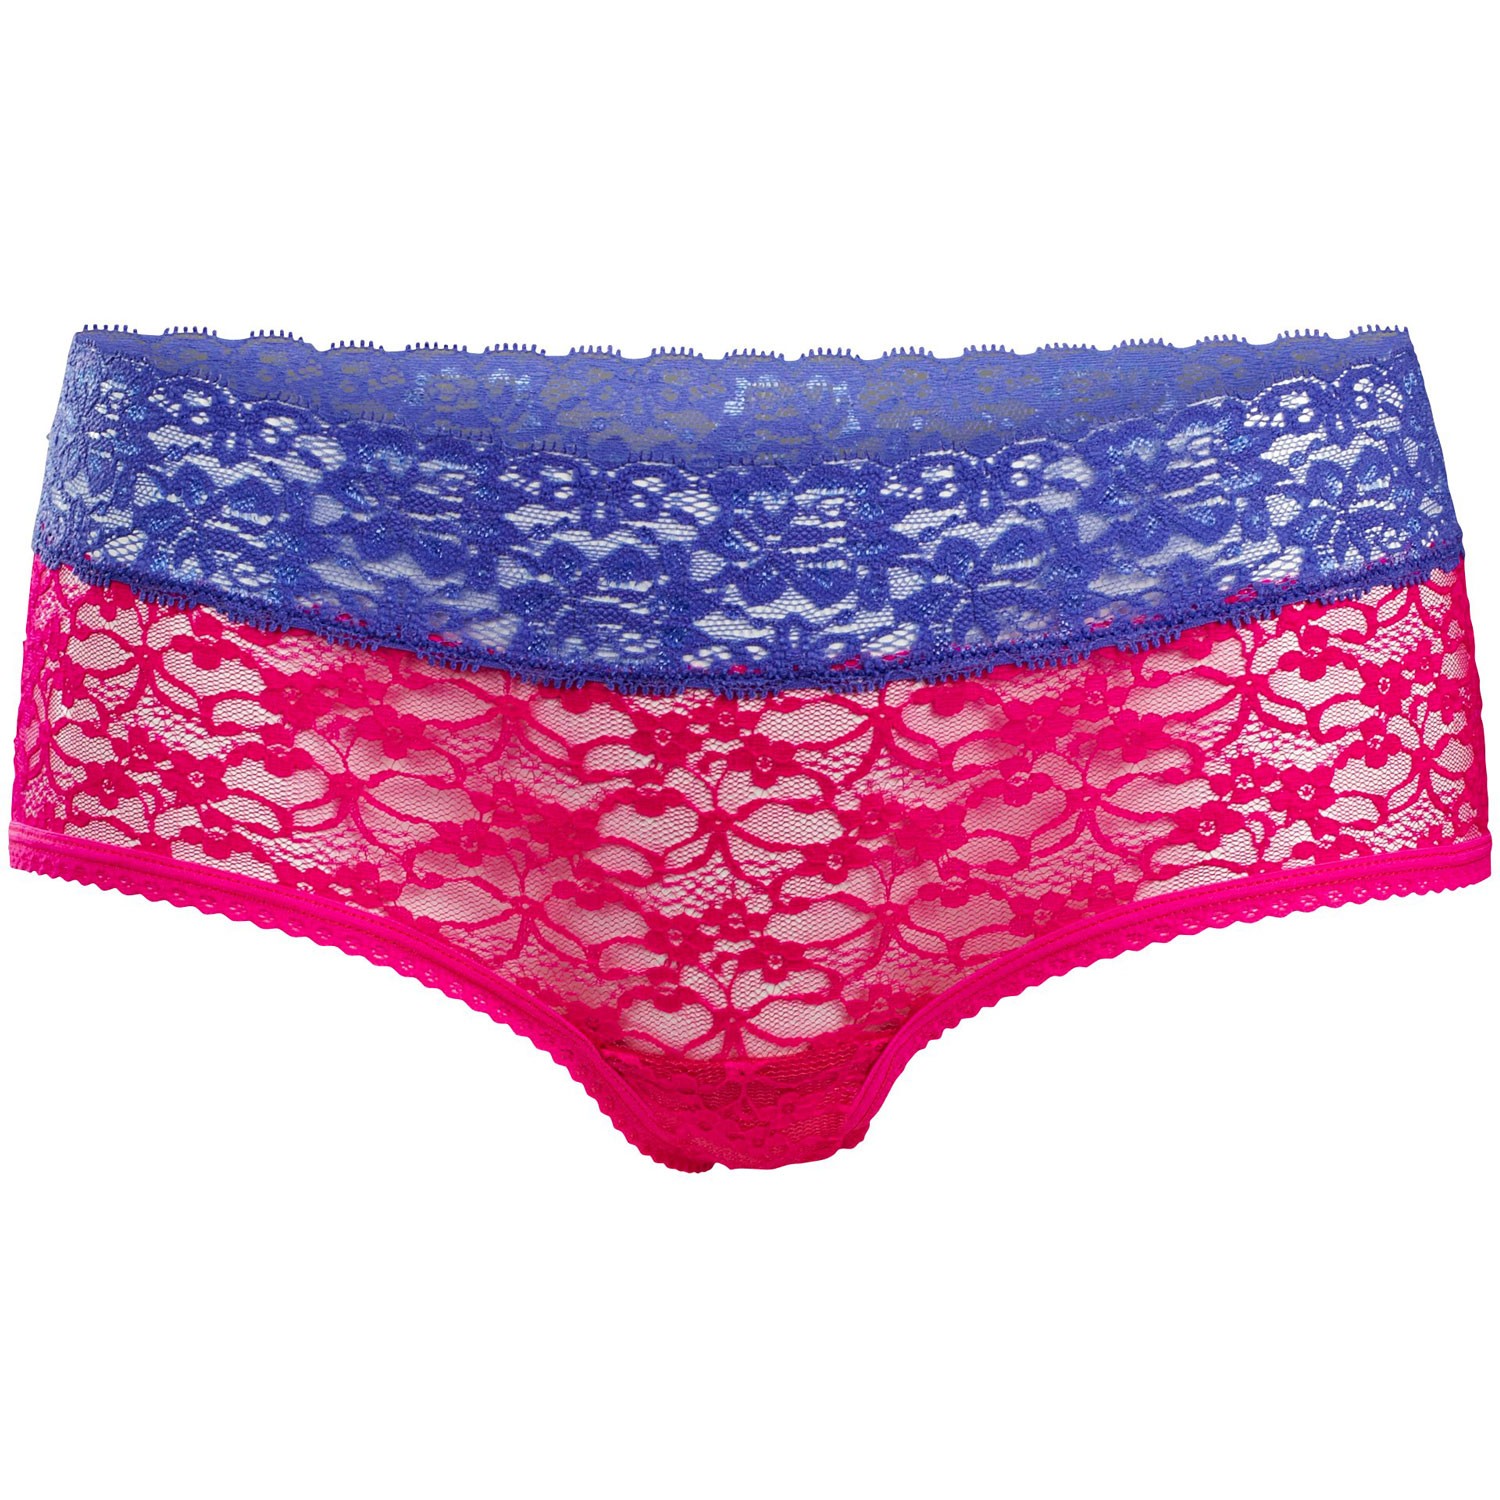 Björn Borg Love All Lace Hotpant Pink/Purple